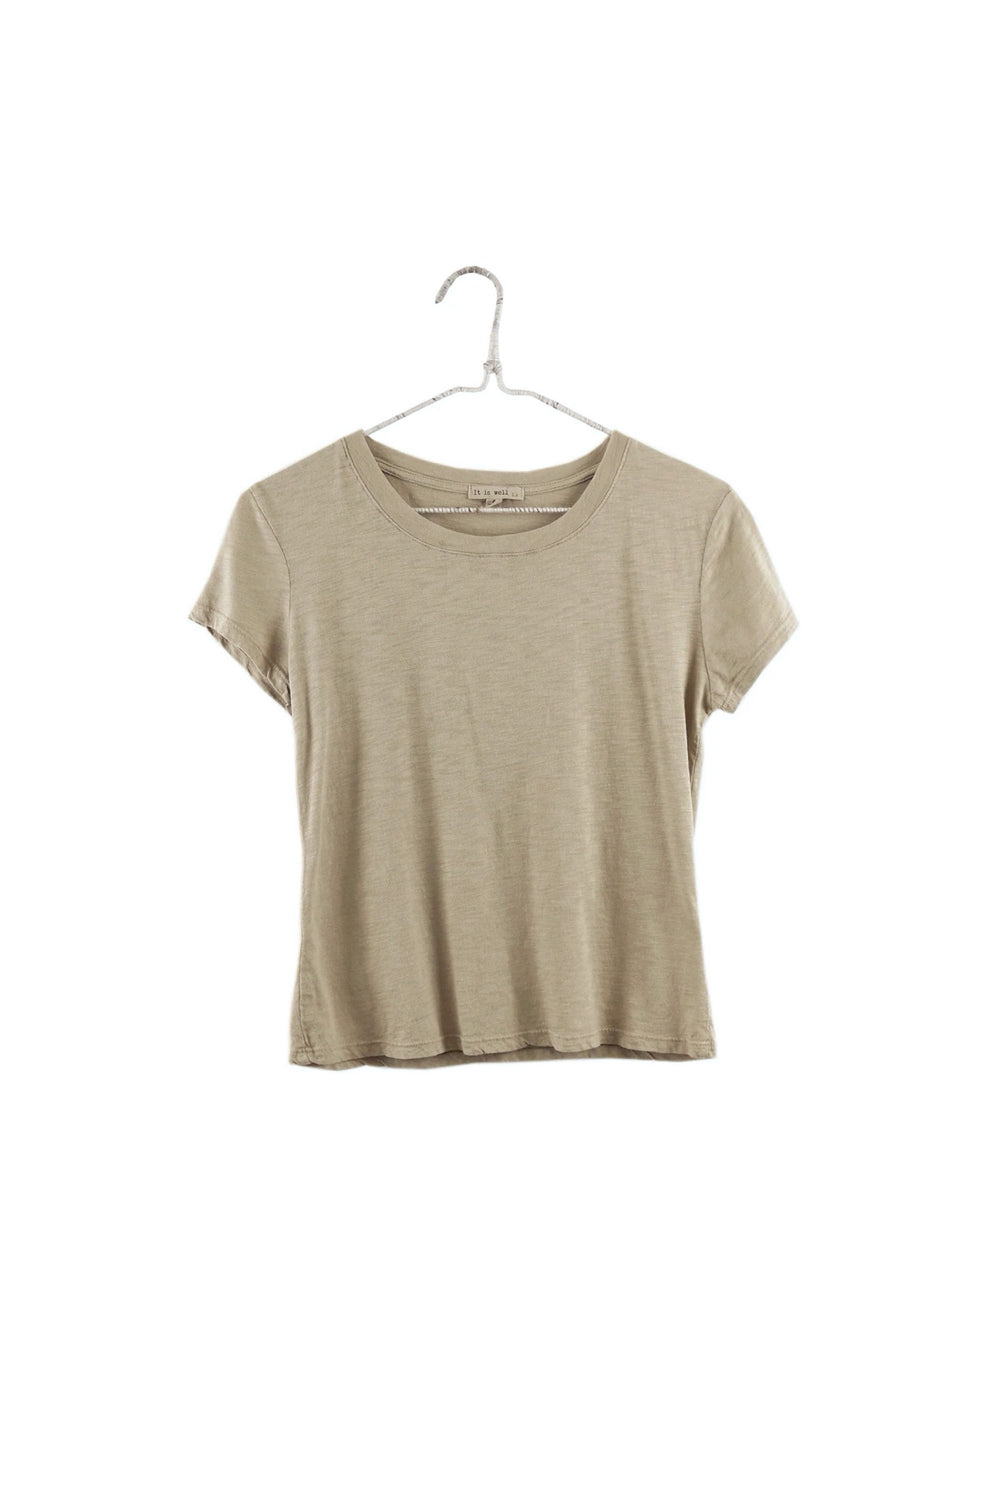 Taupe Baby Tee